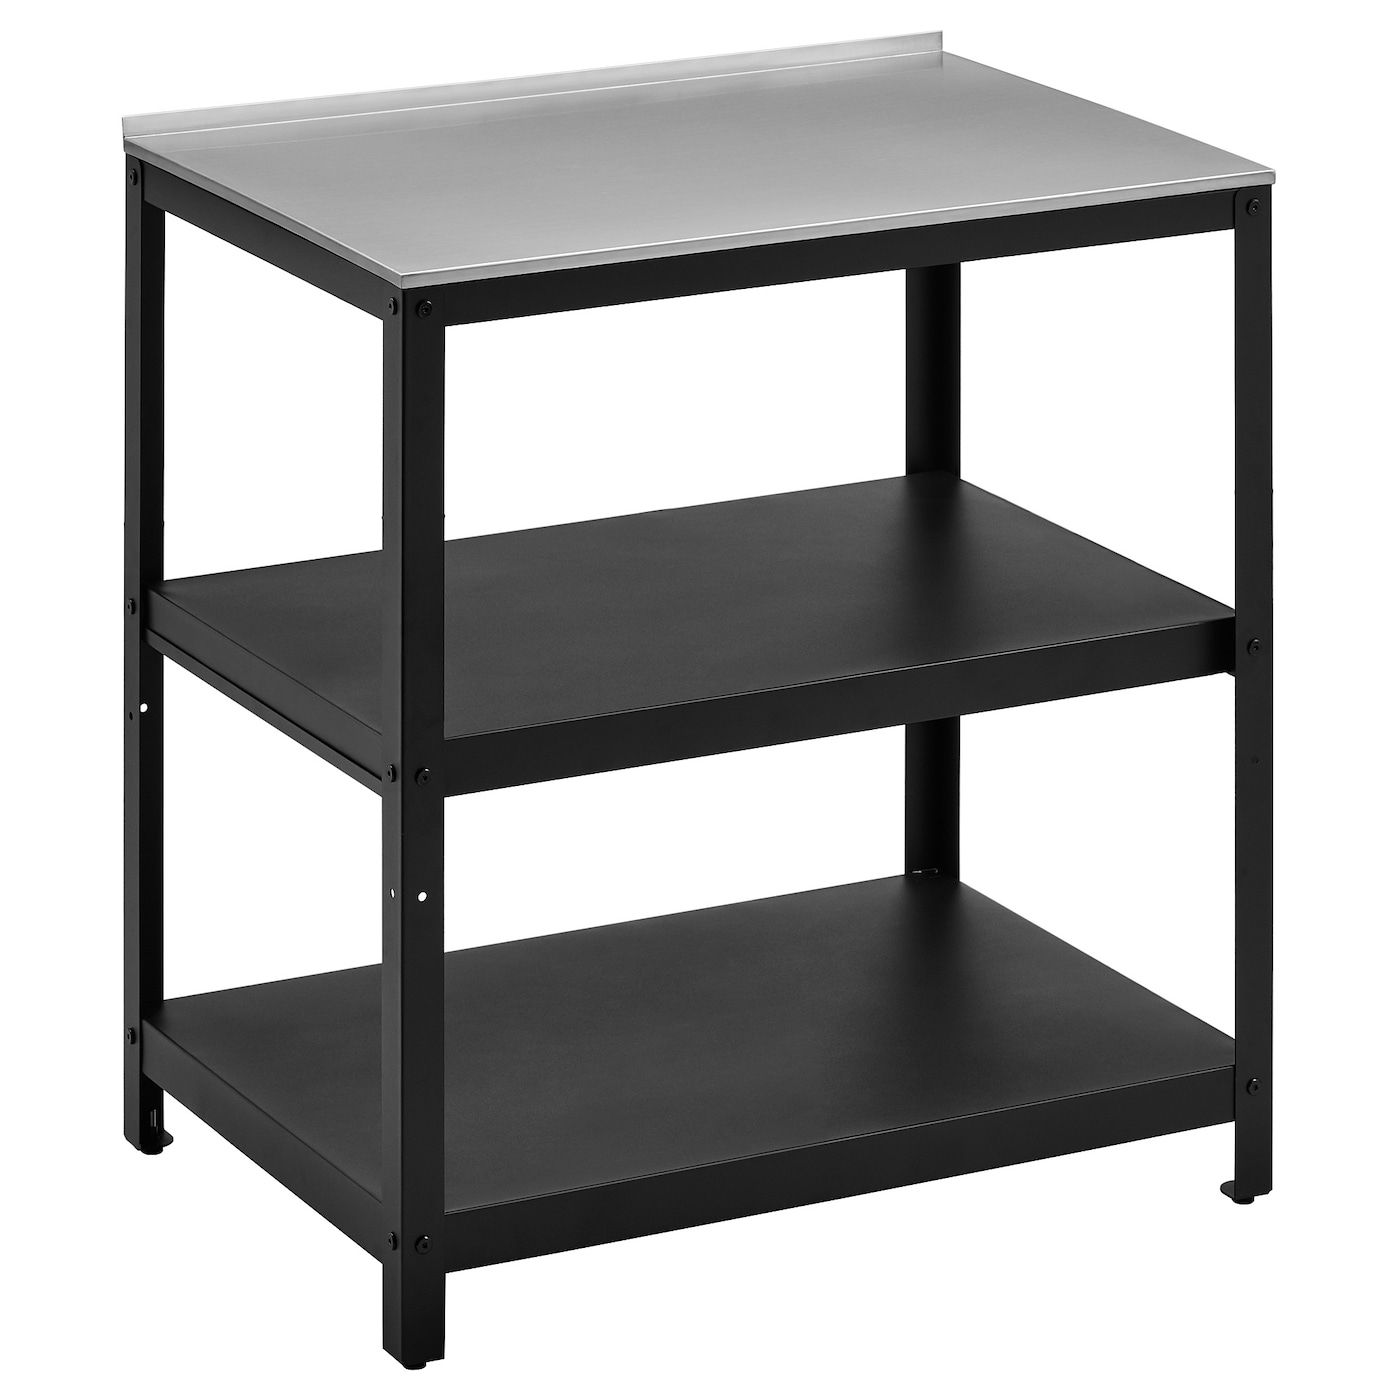 Well Liked Grillskär Kitchen Island Shelf Unit, Black/stainless Steel Outdoor,  337/8x24" – Ikea Regarding Outdoor Tables With Shelf (View 14 of 15)